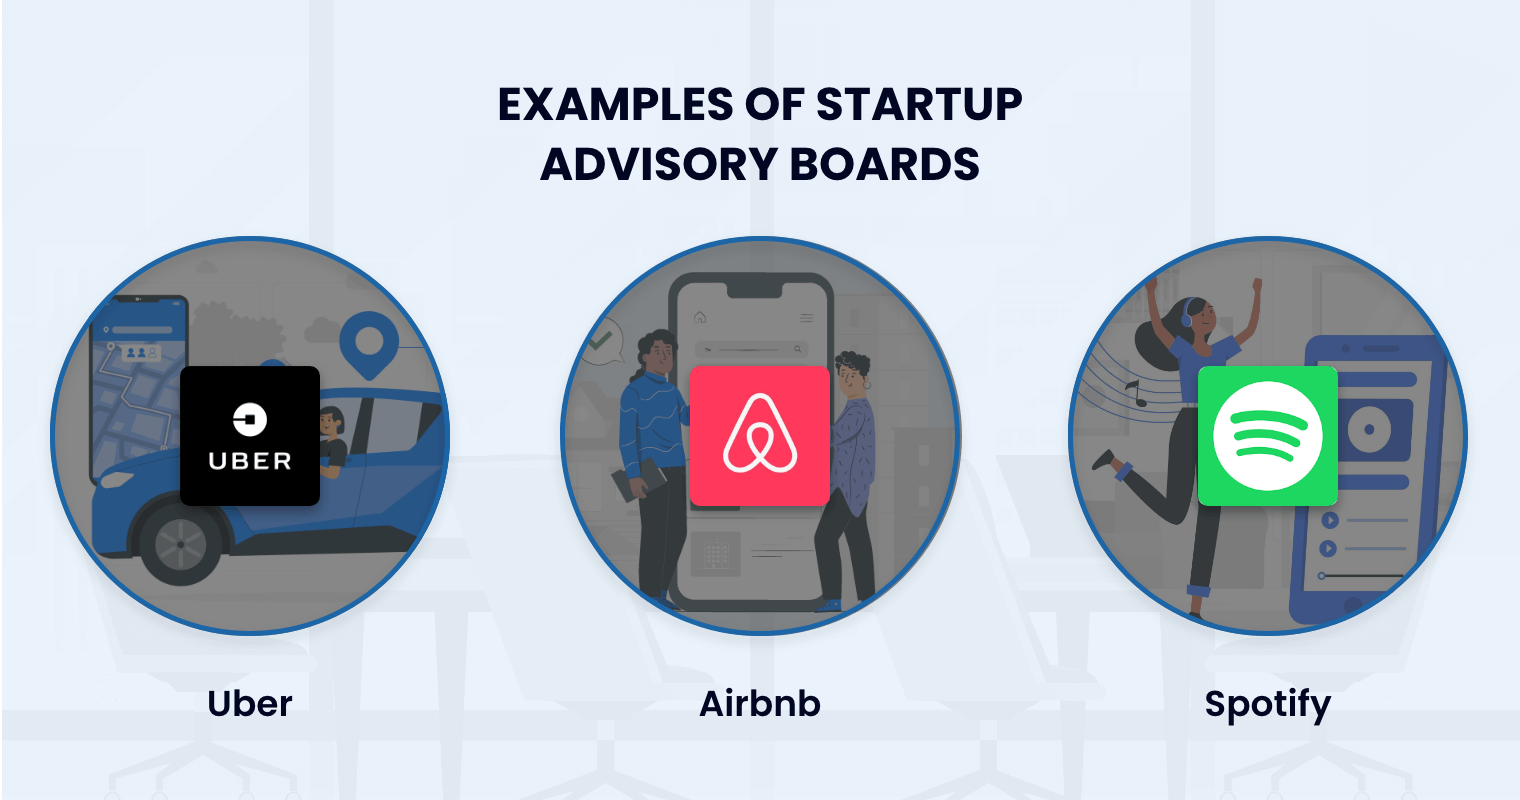 Examples of Startup Advisory Boards: Uber, Airbnb, Spotify